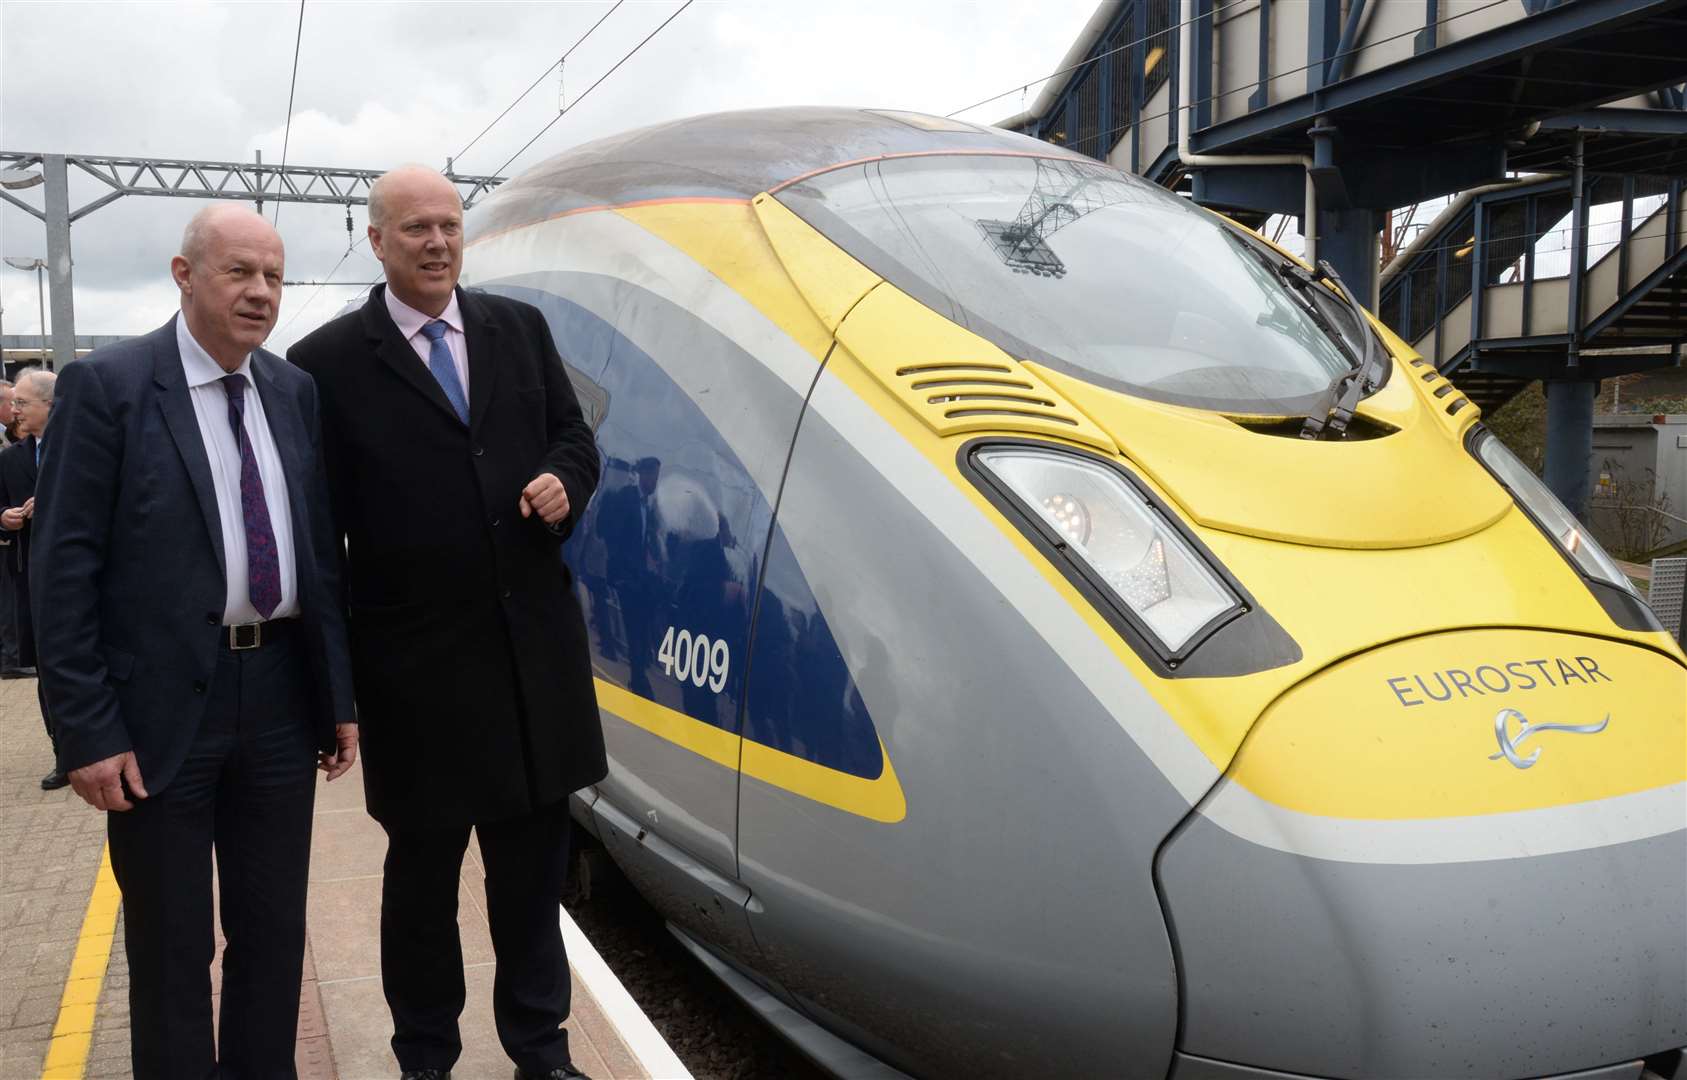 Damien Green MP and Secretary of State for Transport Chris Grayling inspect one of the new e320 class trains at Ashford International station in April 2018